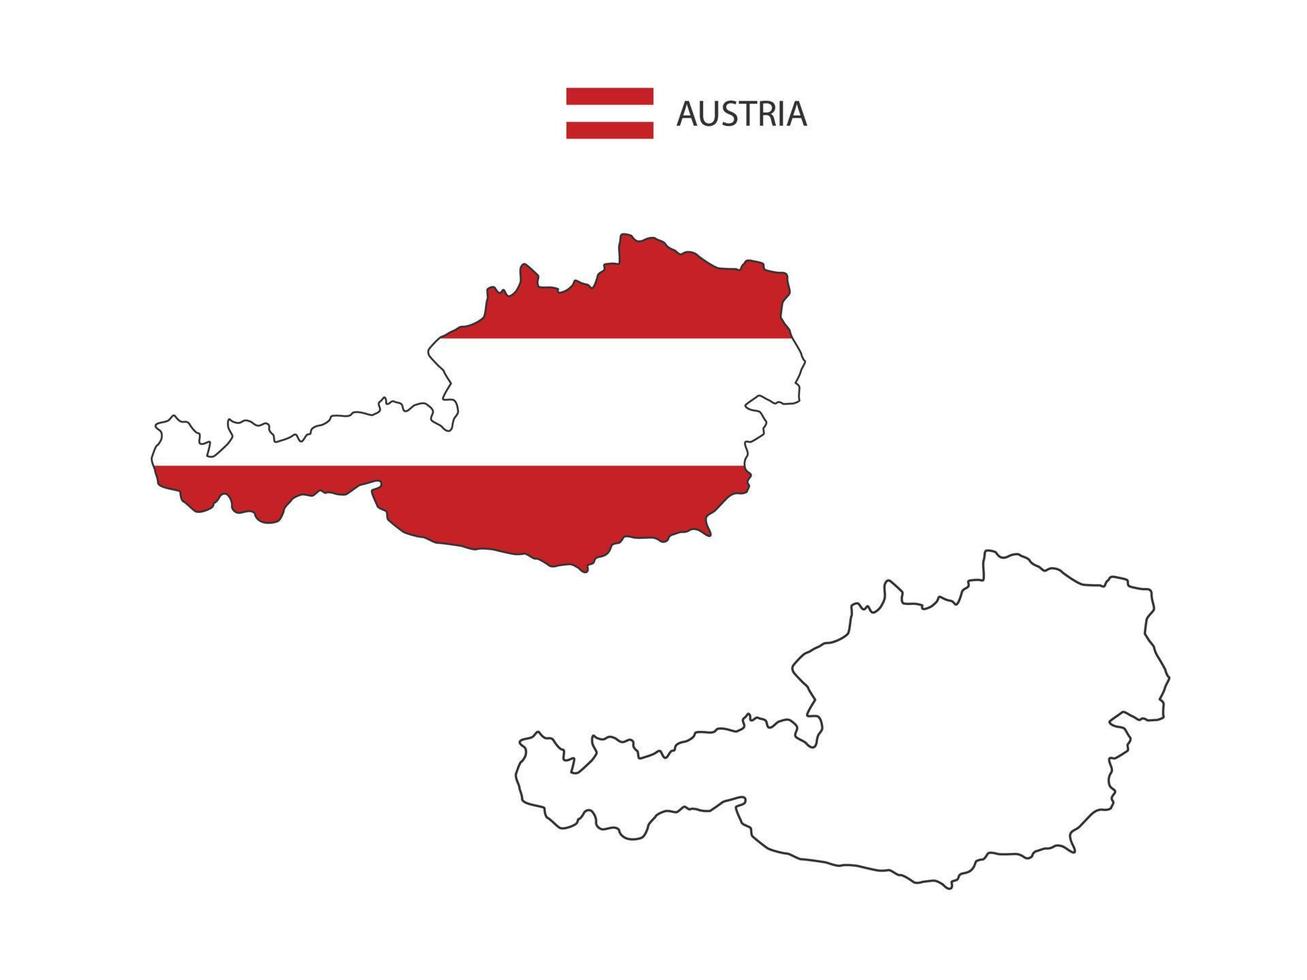 Austria map city vector divided by outline simplicity style. Have 2 versions, black thin line version and color of country flag version. Both map were on the white background.